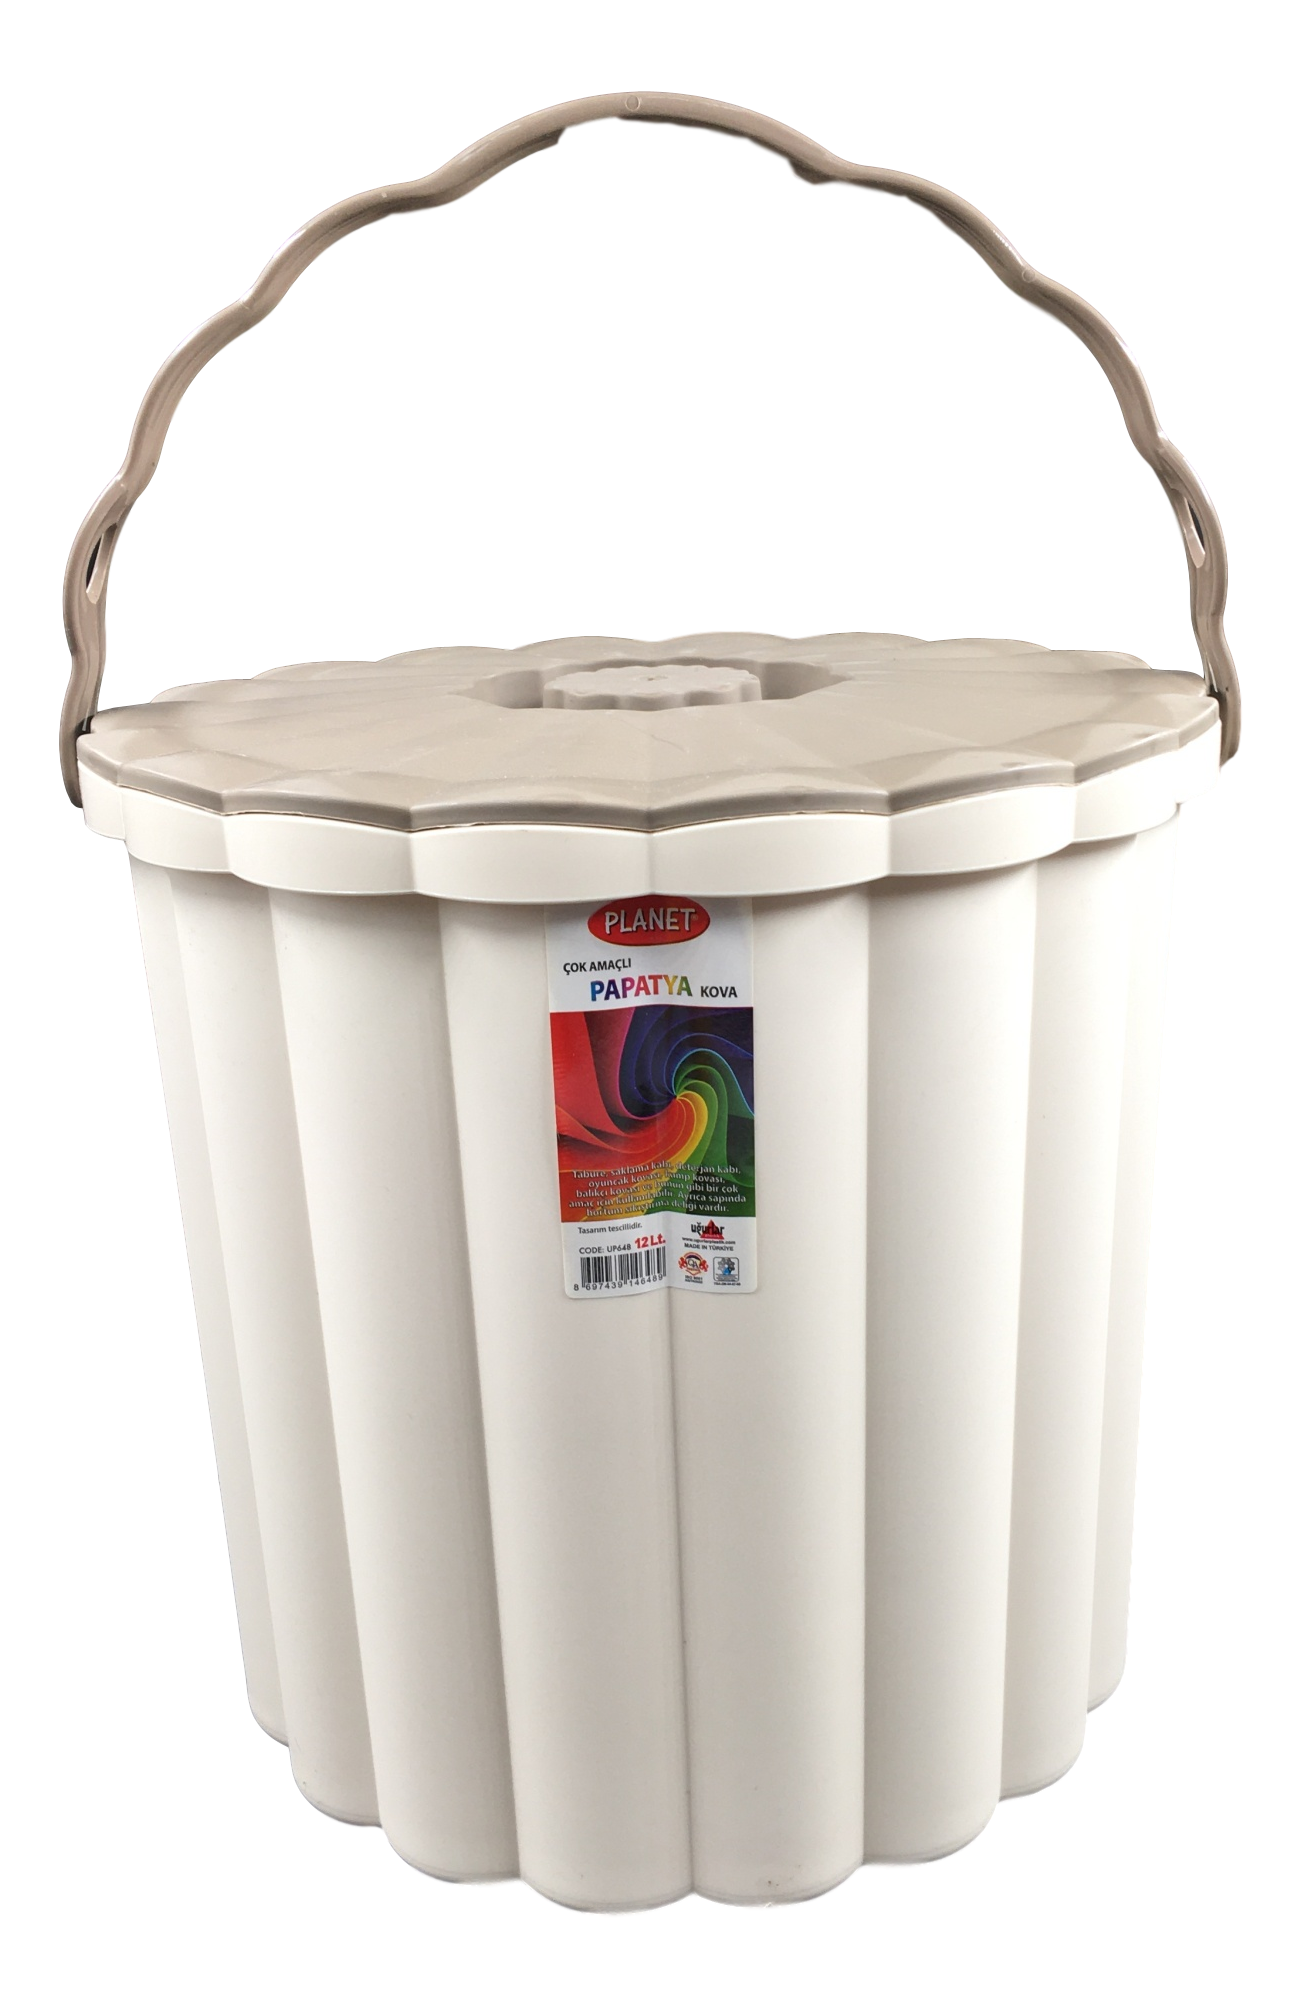 Plastic Bucket with Lid Carry Handle, Ideal for Tub Bucket Animal Feed and more